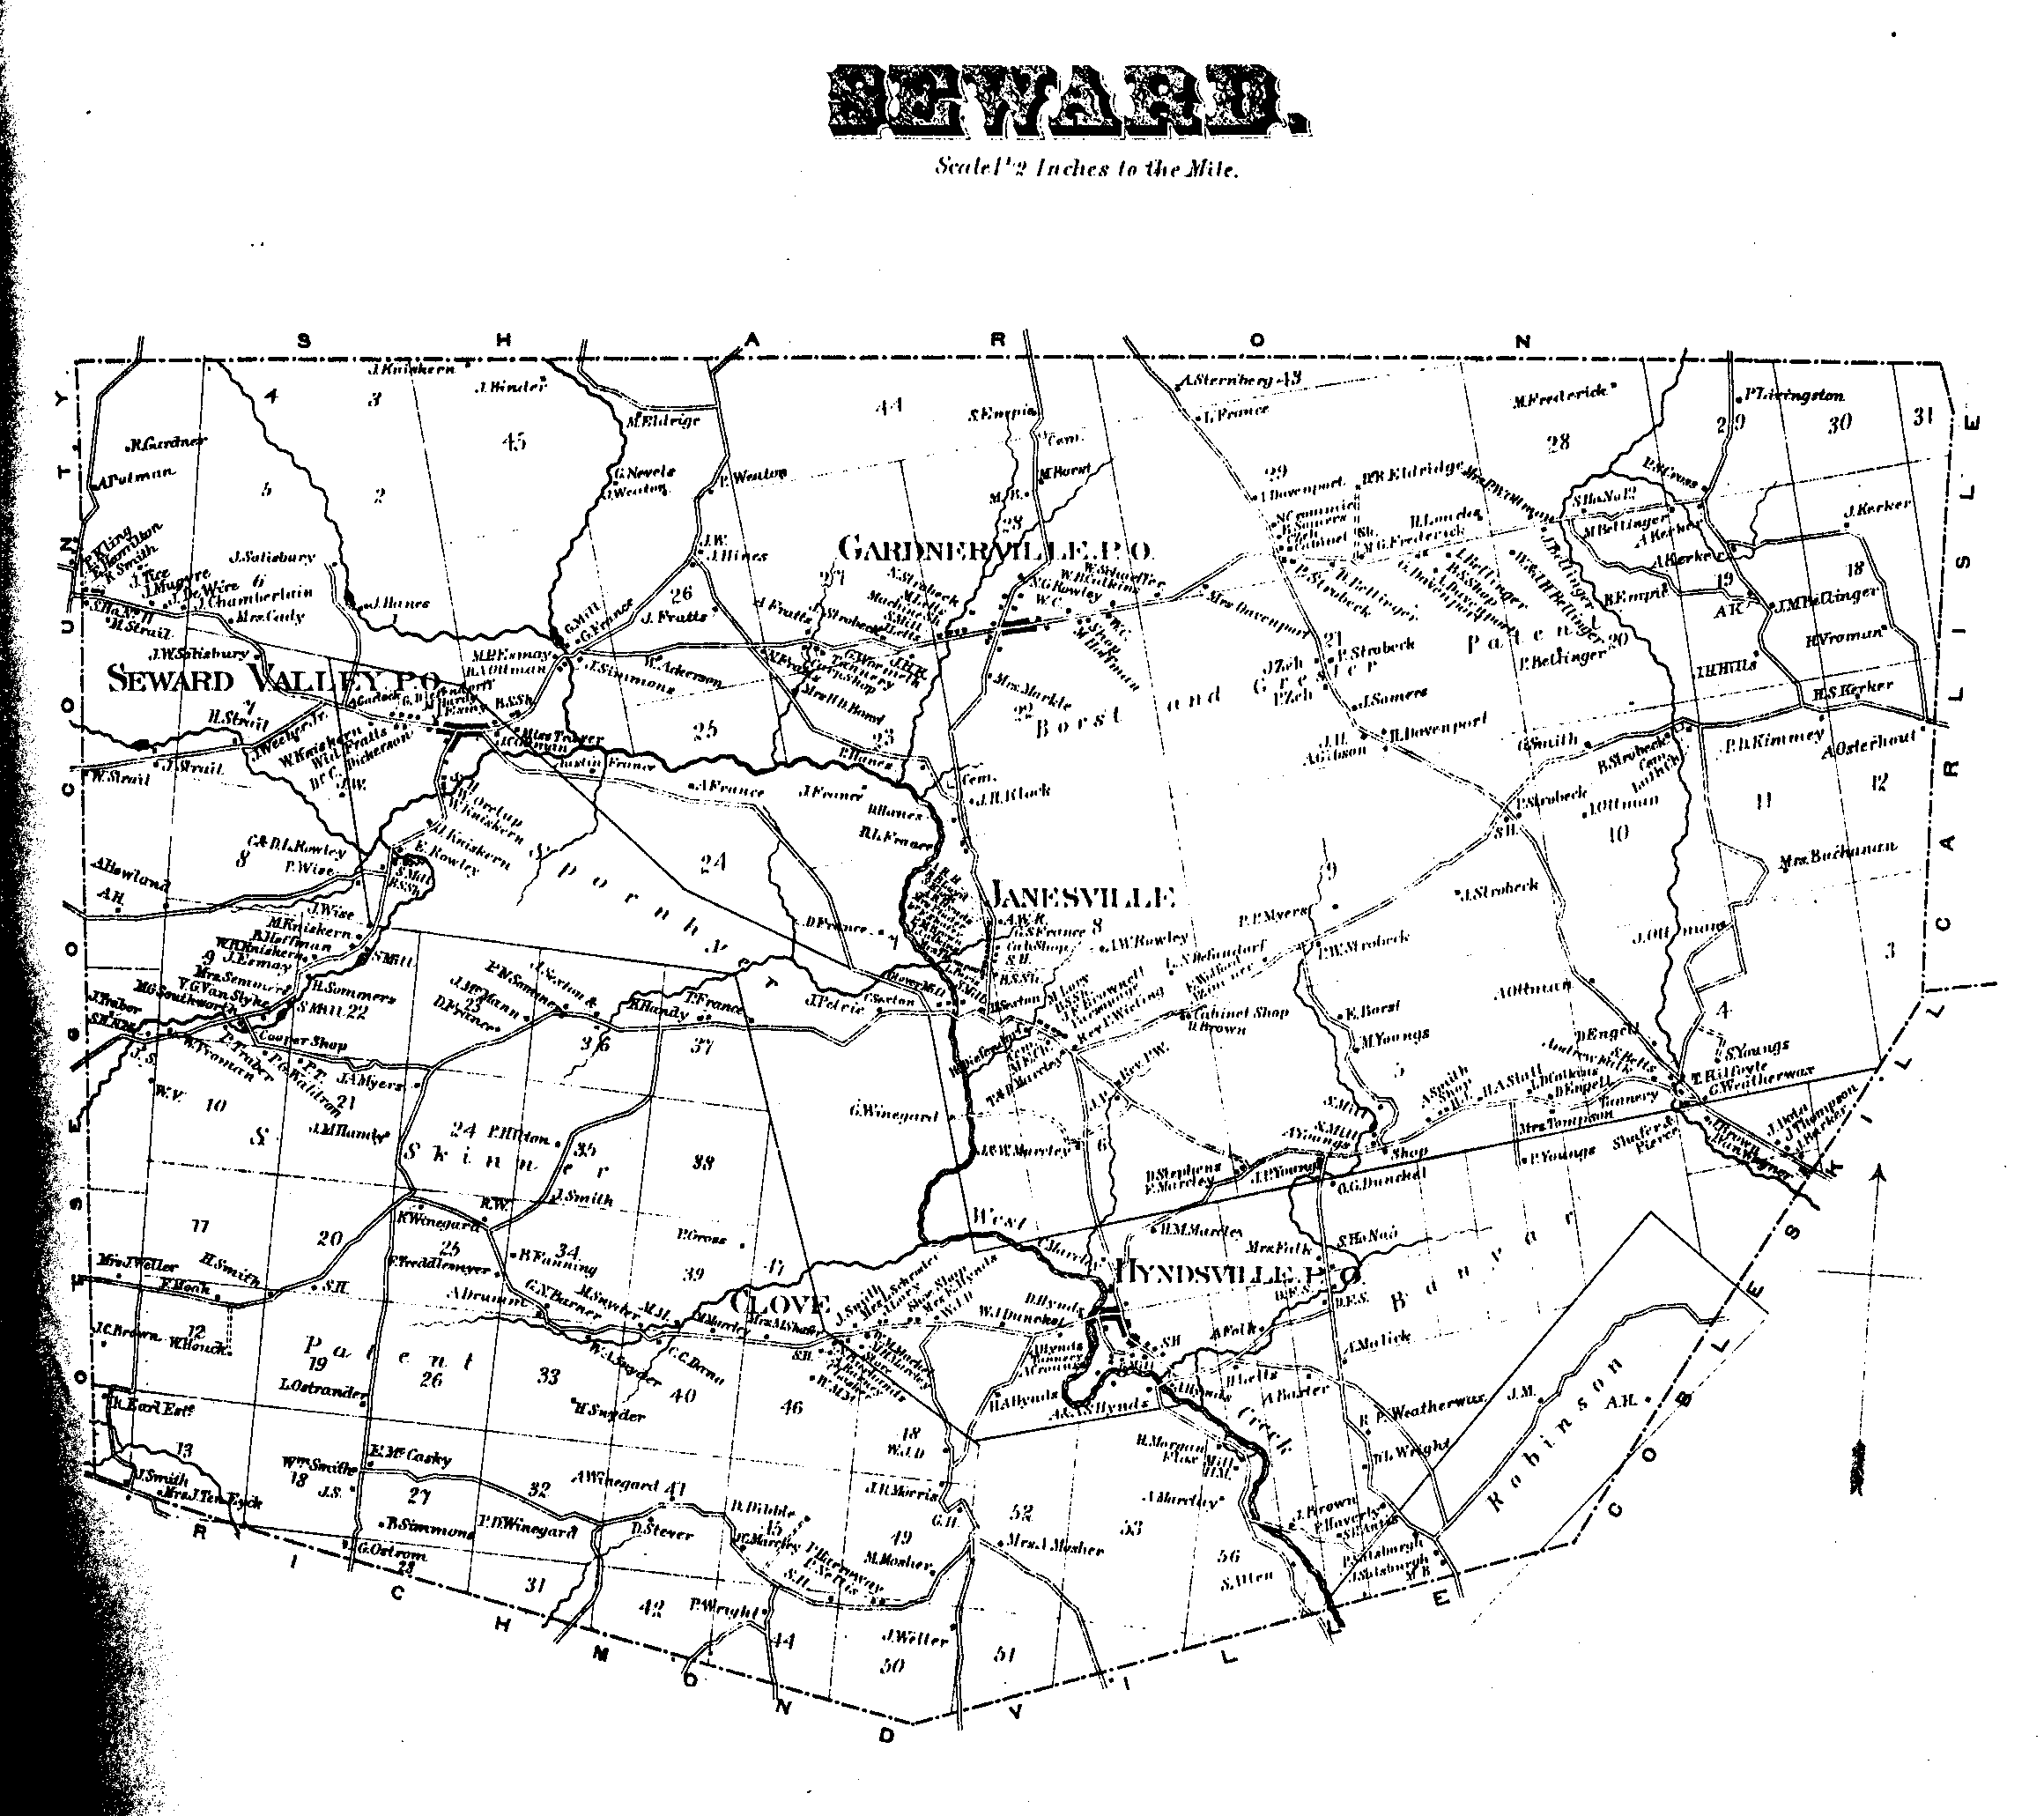 1866 Map - Town of Seward, with surnames